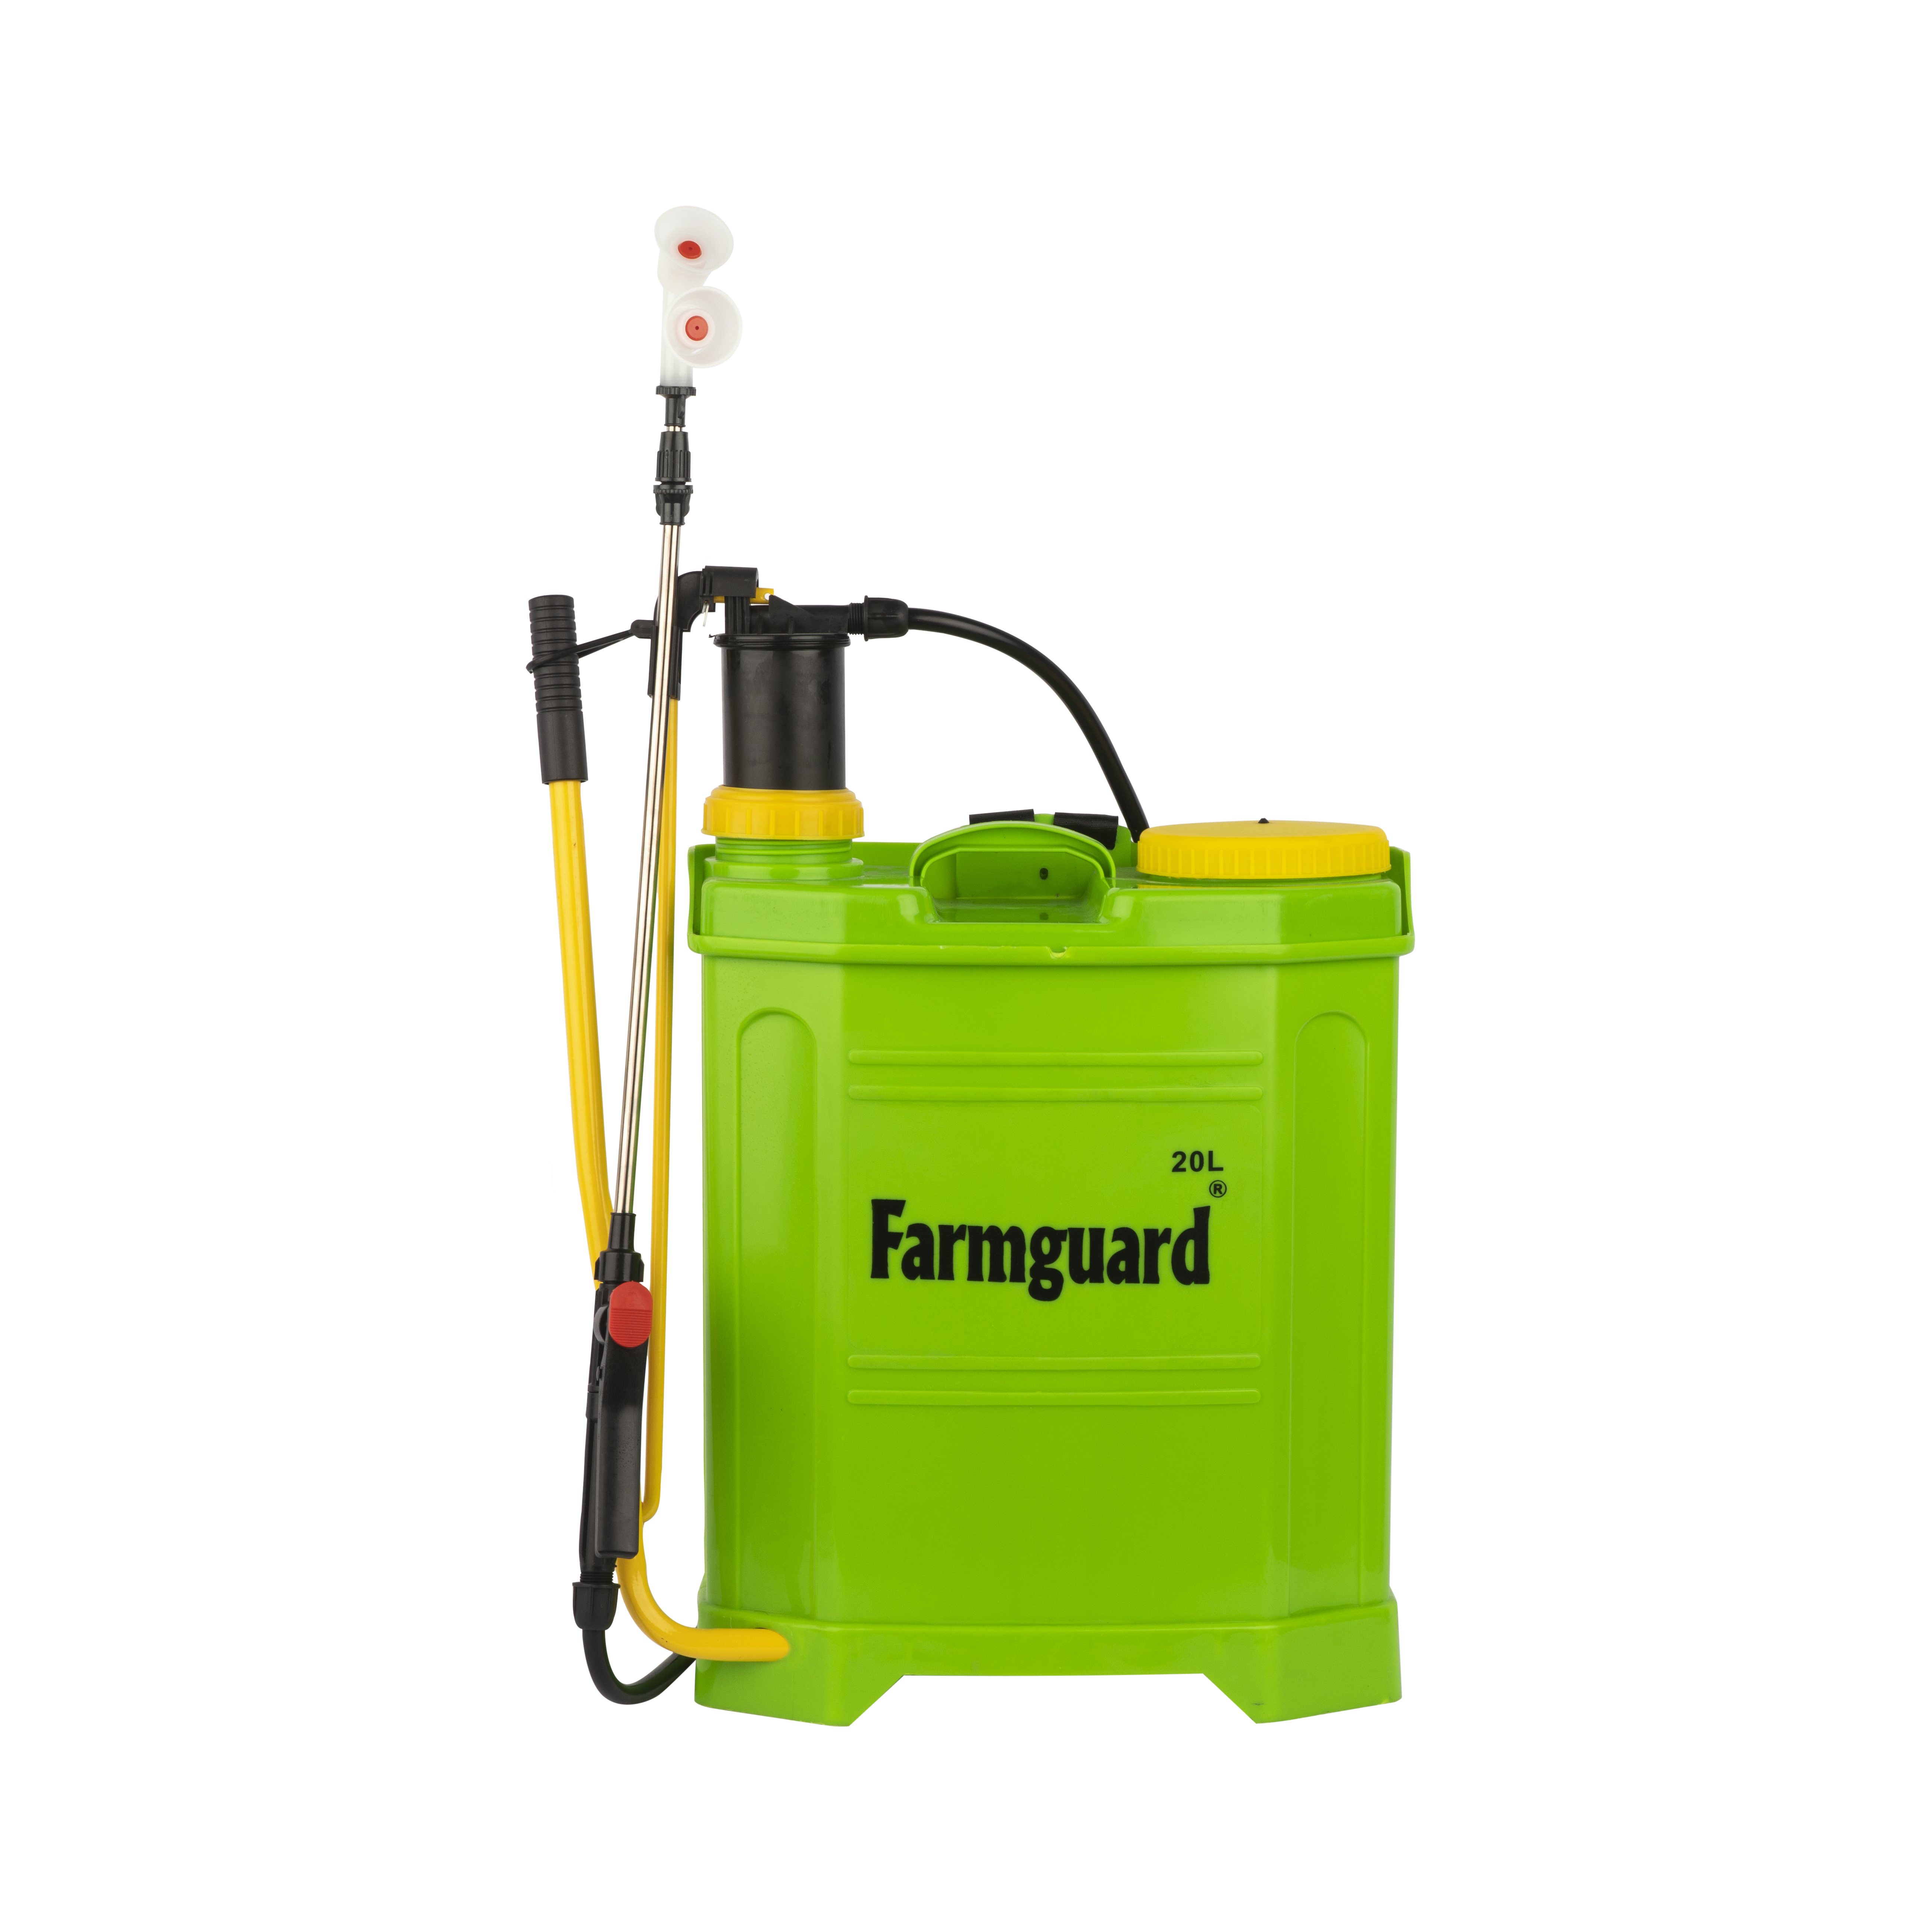 What are the advantages of Garden Sprayer